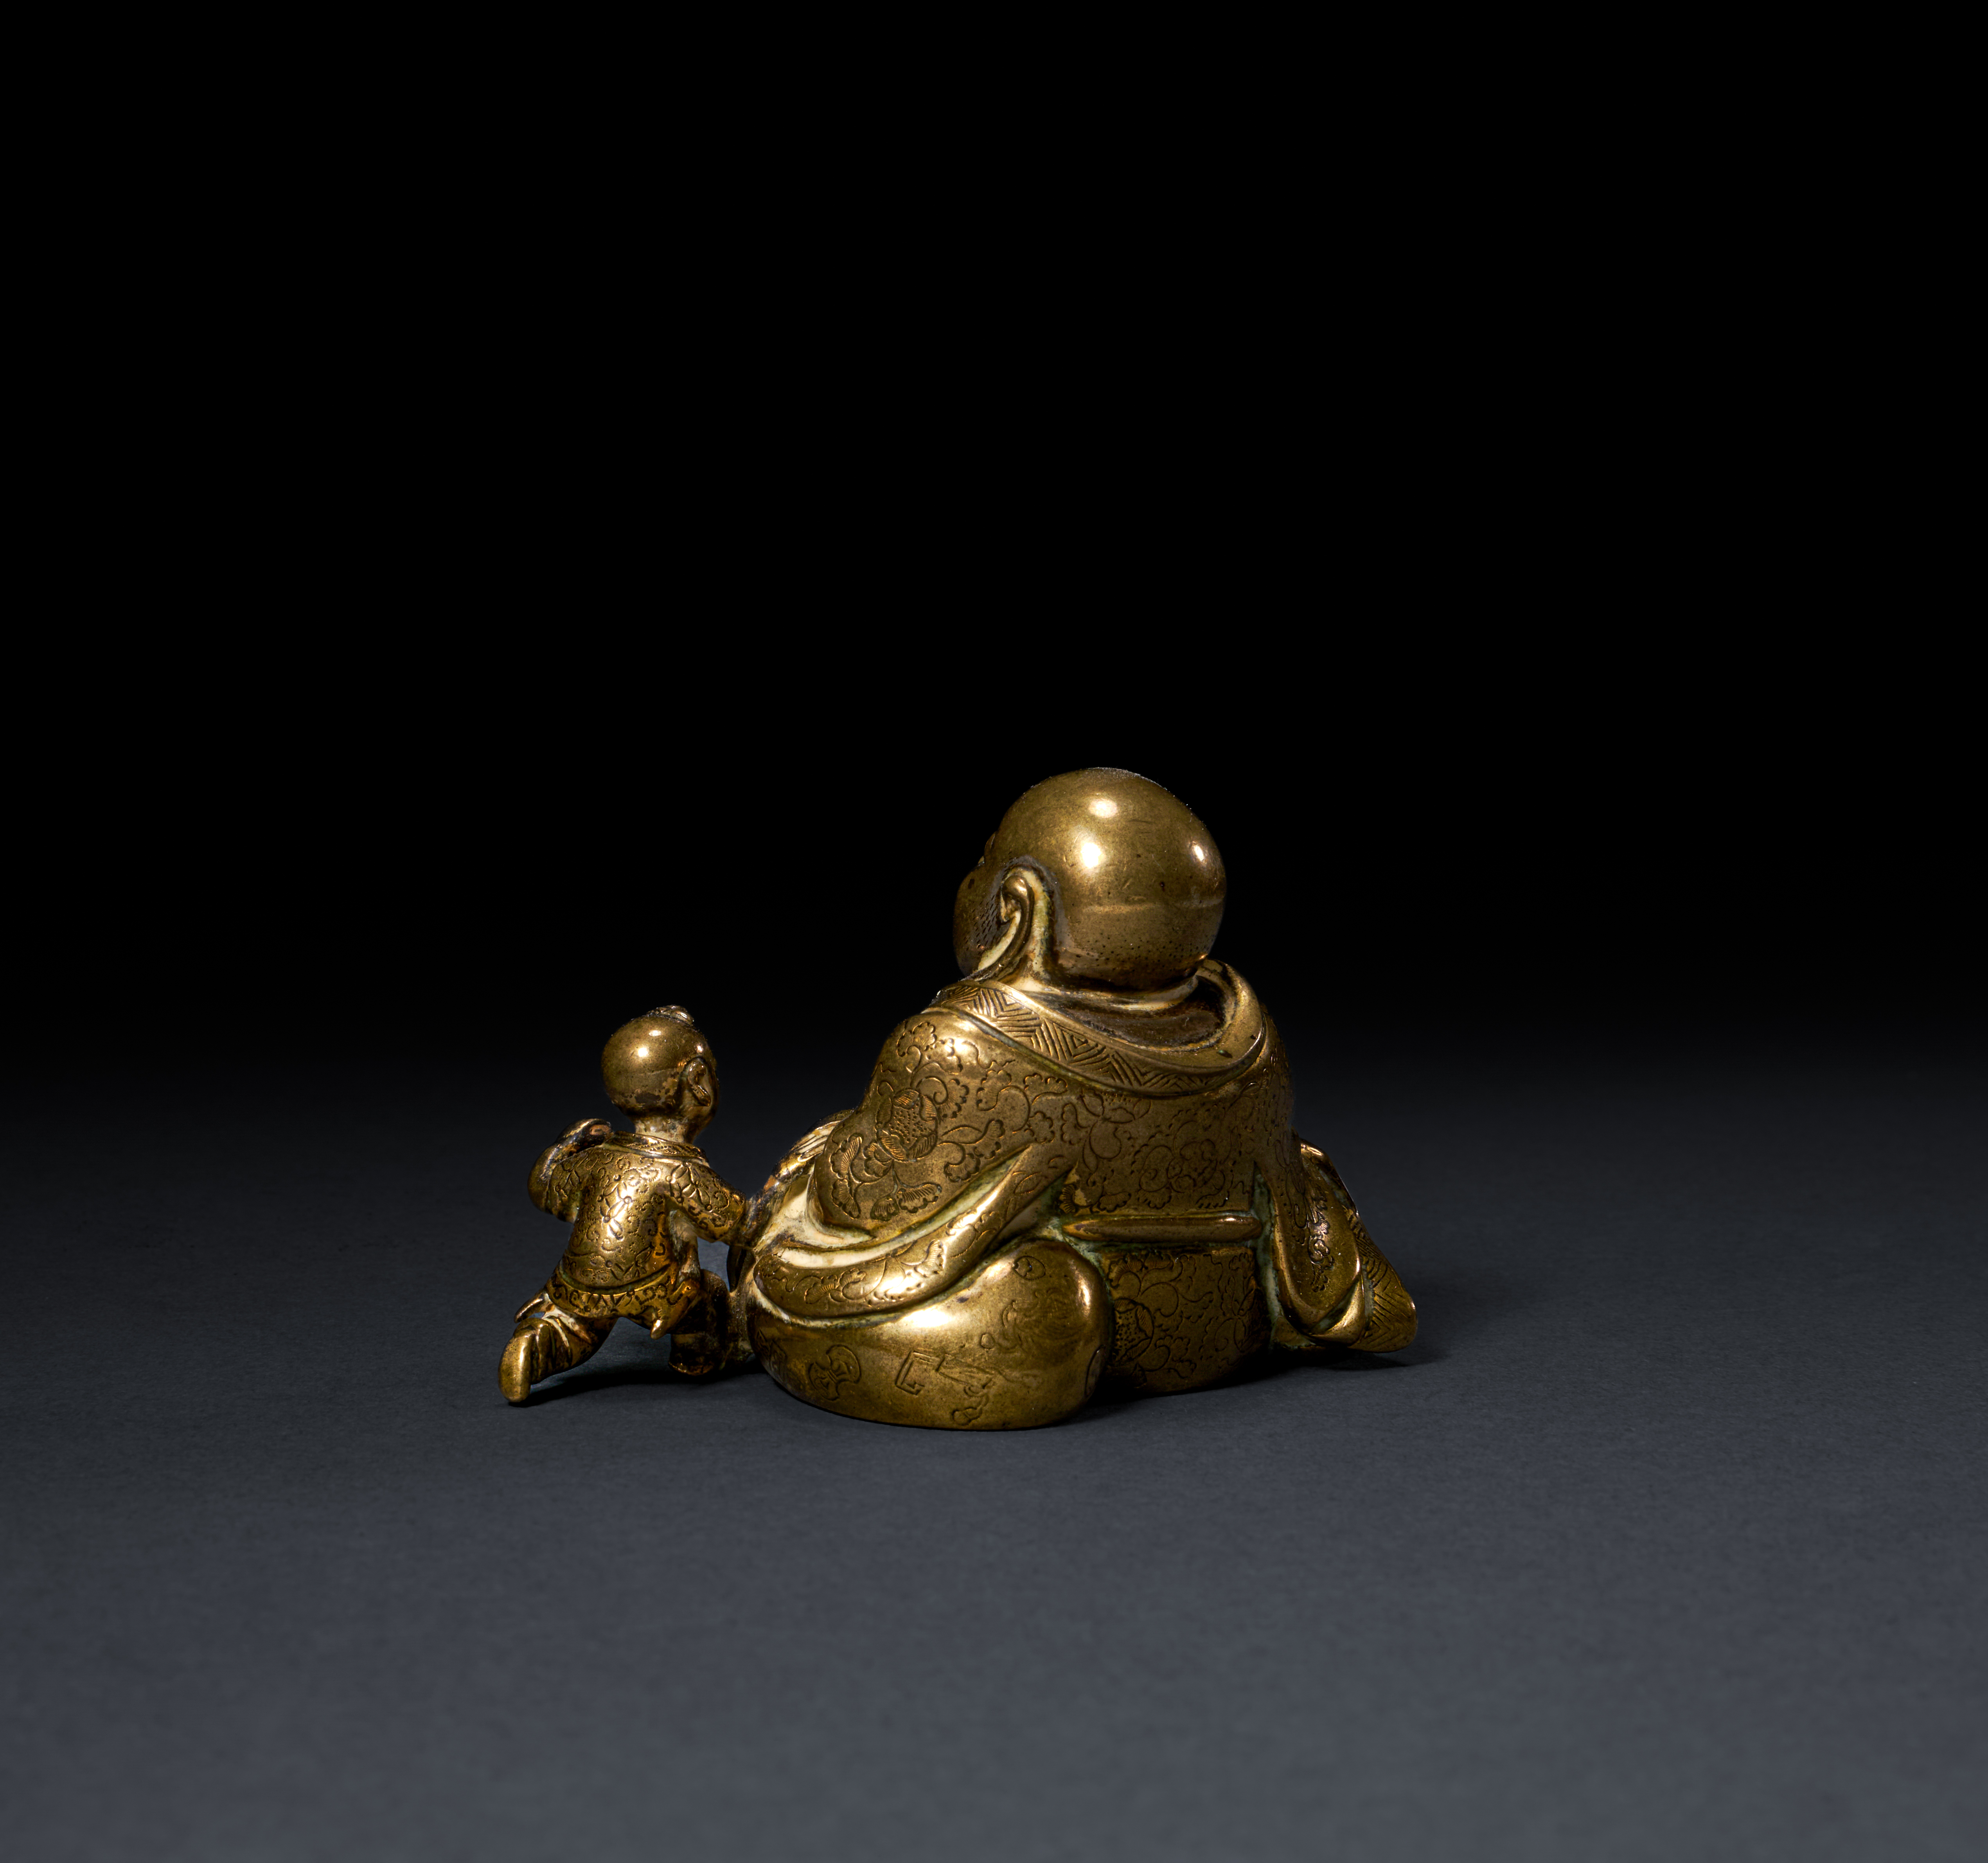 A CHINESE GILT BRONZE FIGURE OF A HOTEI & BOY, QING DYNASTY (1644-1911) - Image 3 of 4